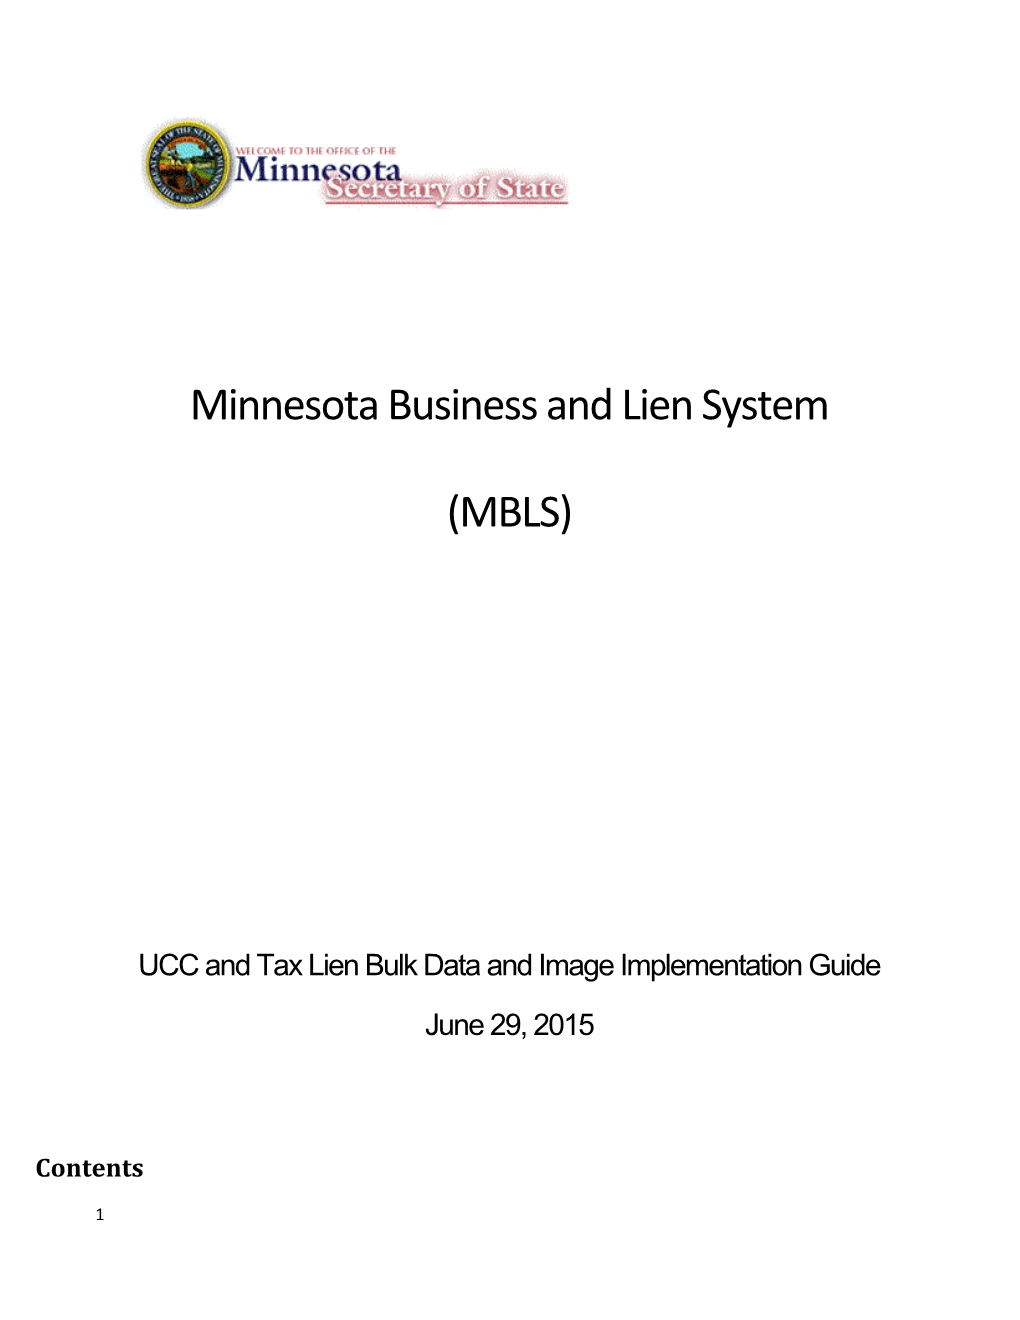 UCC and Tax Lien Bulk Data and Image Implementation Guide